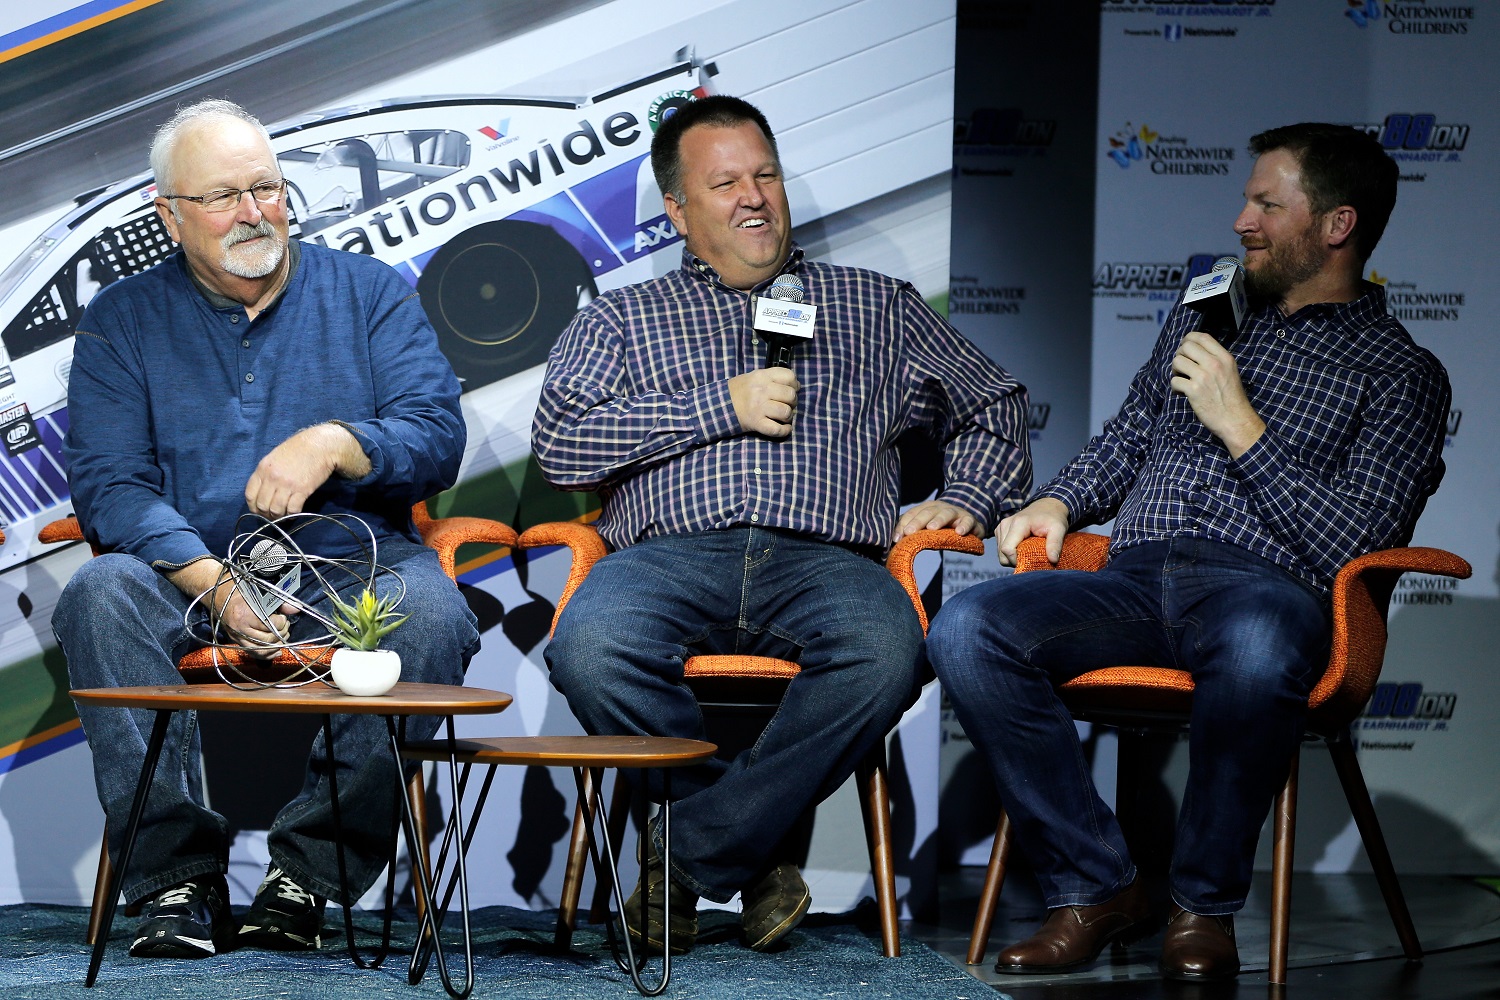 Tony Eury Sr., Tony Eury Jr., and Dale Earnhardt Jr. talk on stage during 'Appreci88ion, An Evening With Dale Earnhardt Jr.' at The Cosmopolitan of Las Vegas on Nov. 28, 2017, in Las Vegas, Nevada.